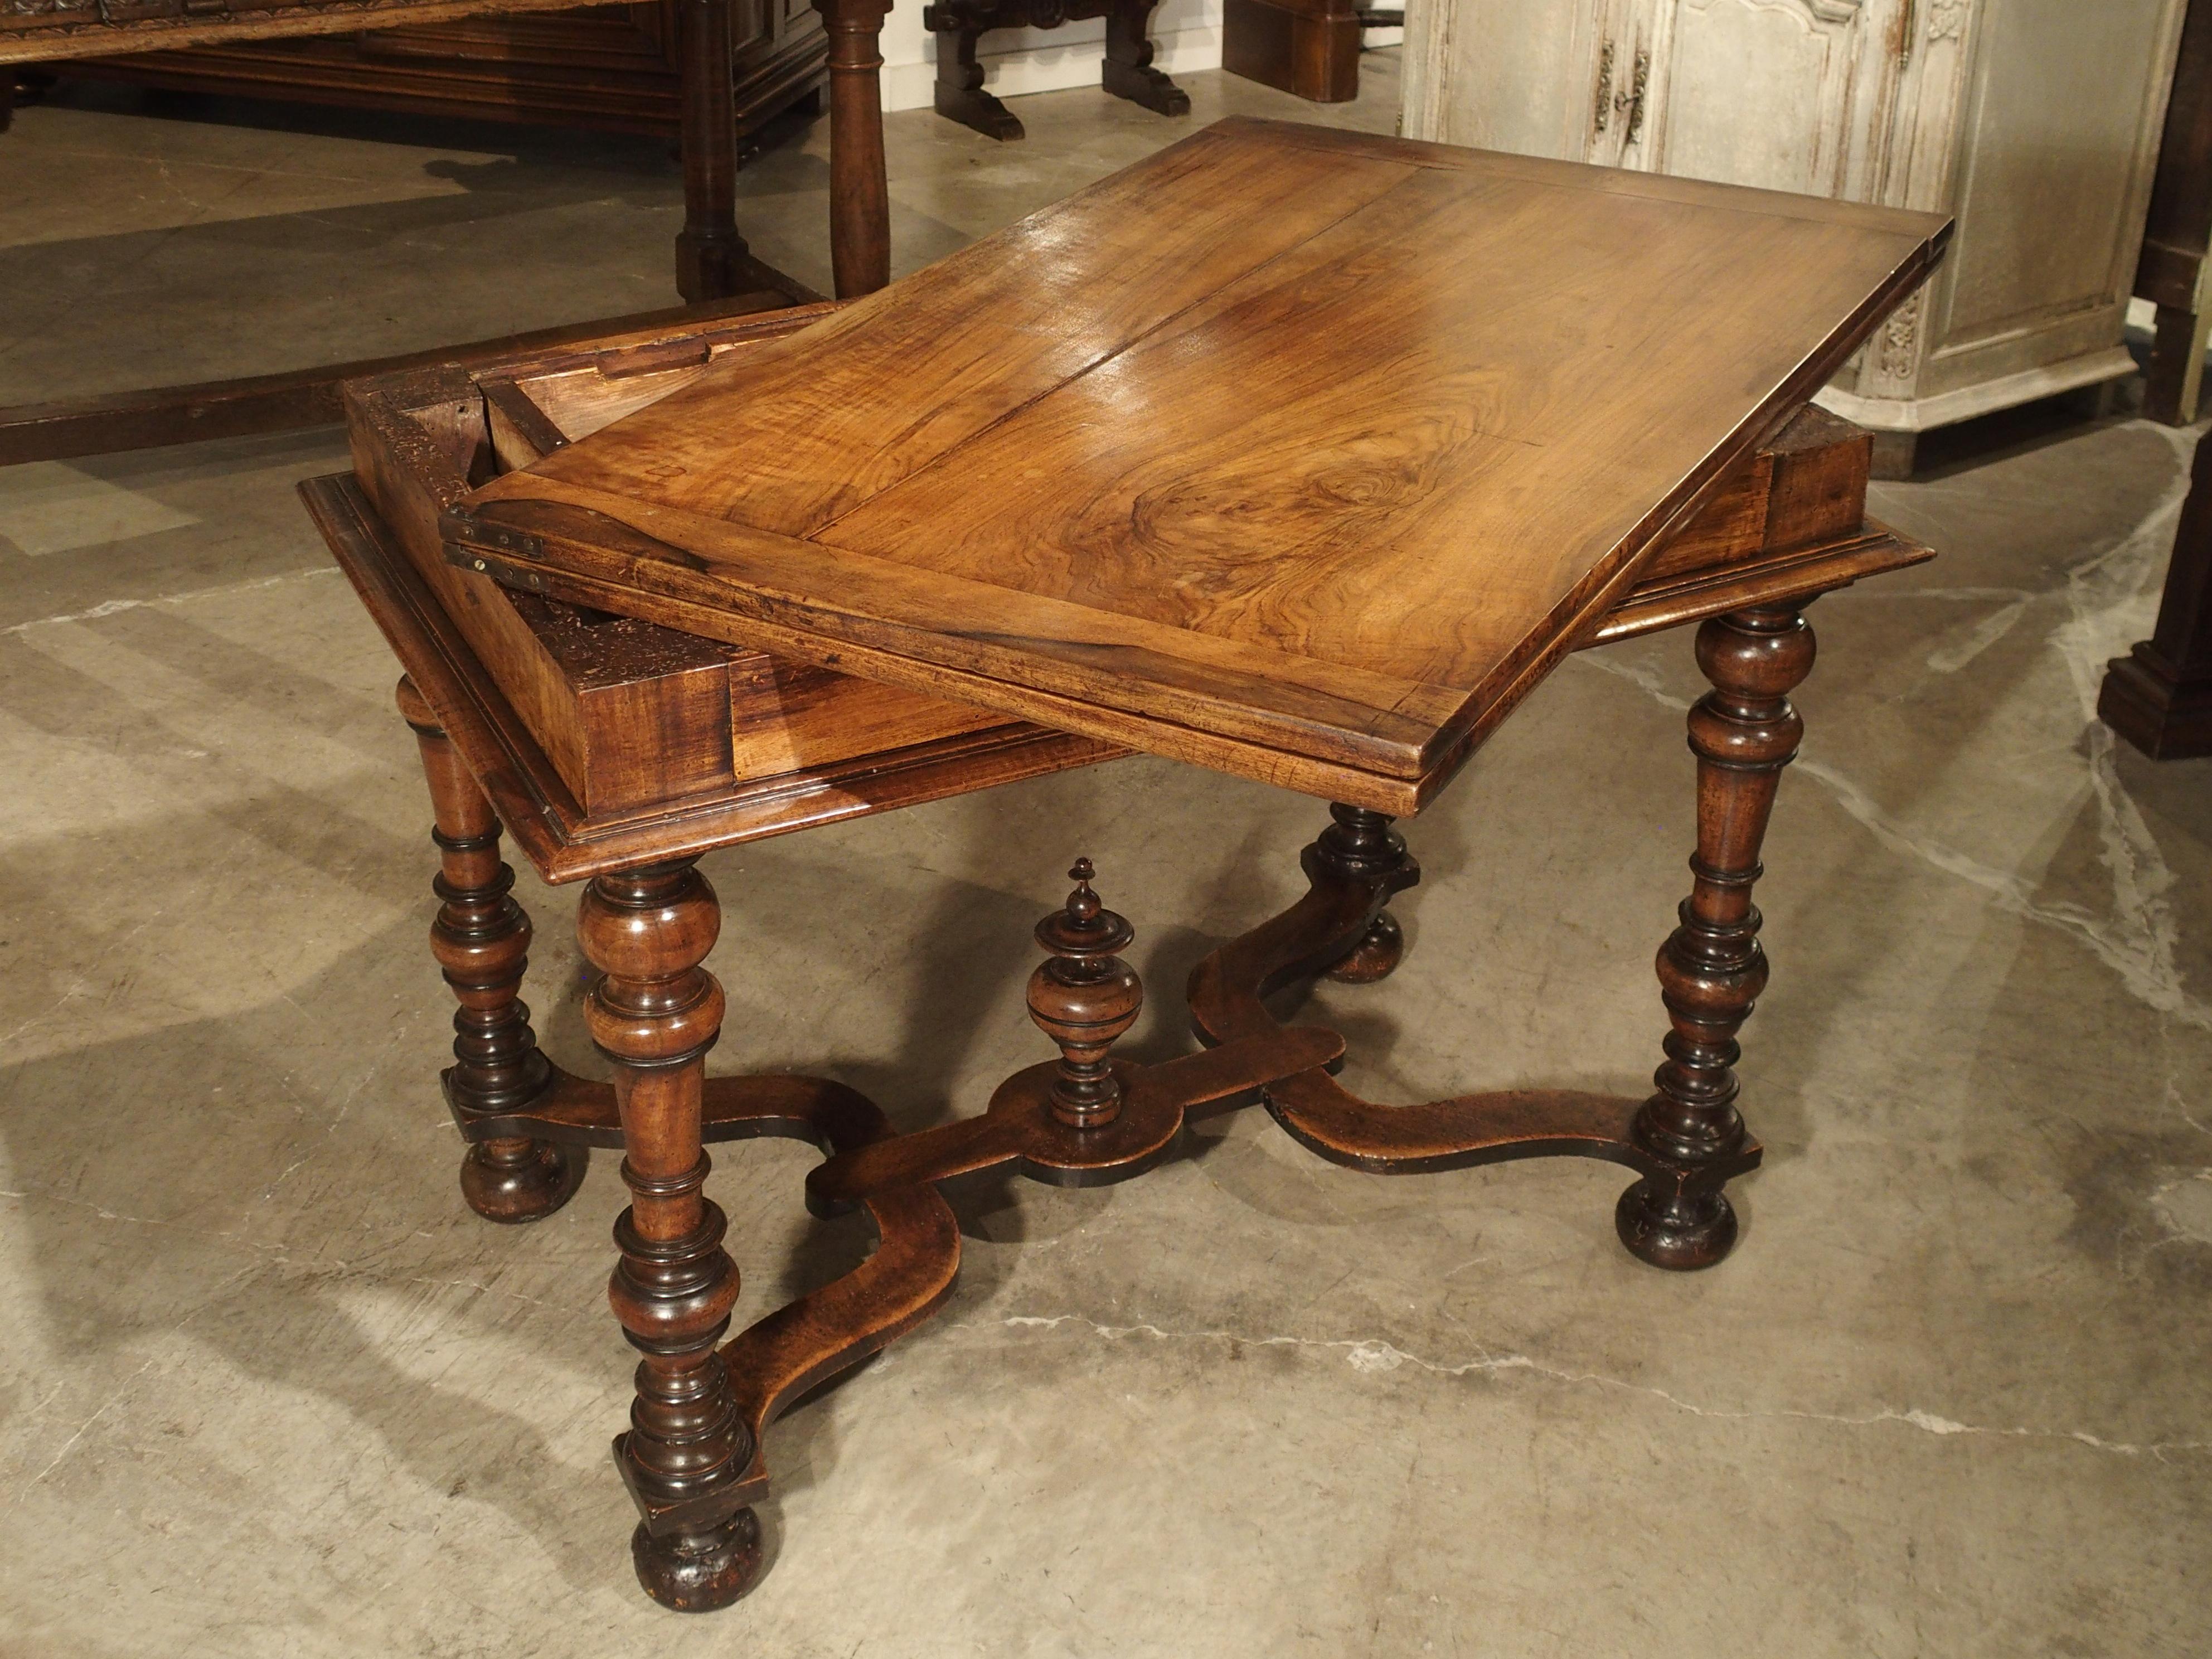 Louis XIII 17th Century French Folding Top Walnut Wood Table